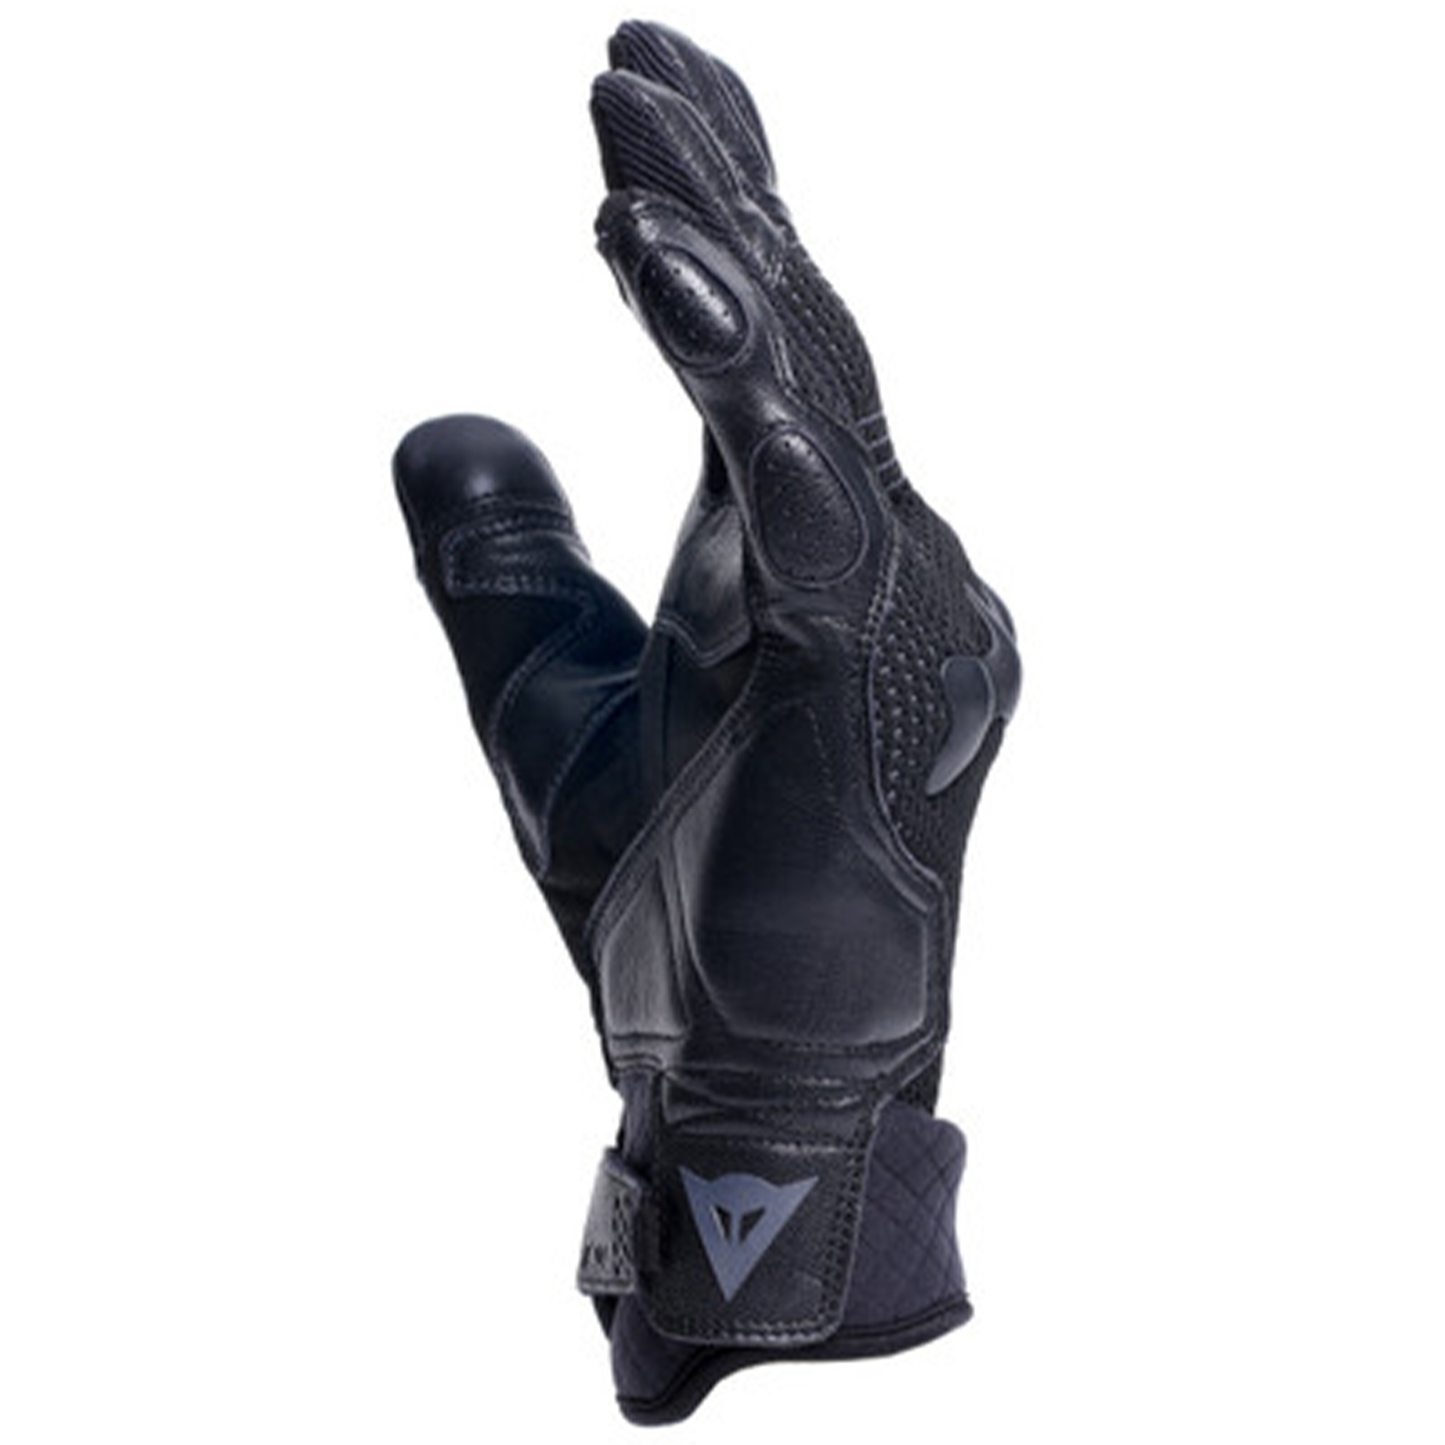 Dainese Unruly Ergo-Tec Gloves - Black/Anthracite (604)